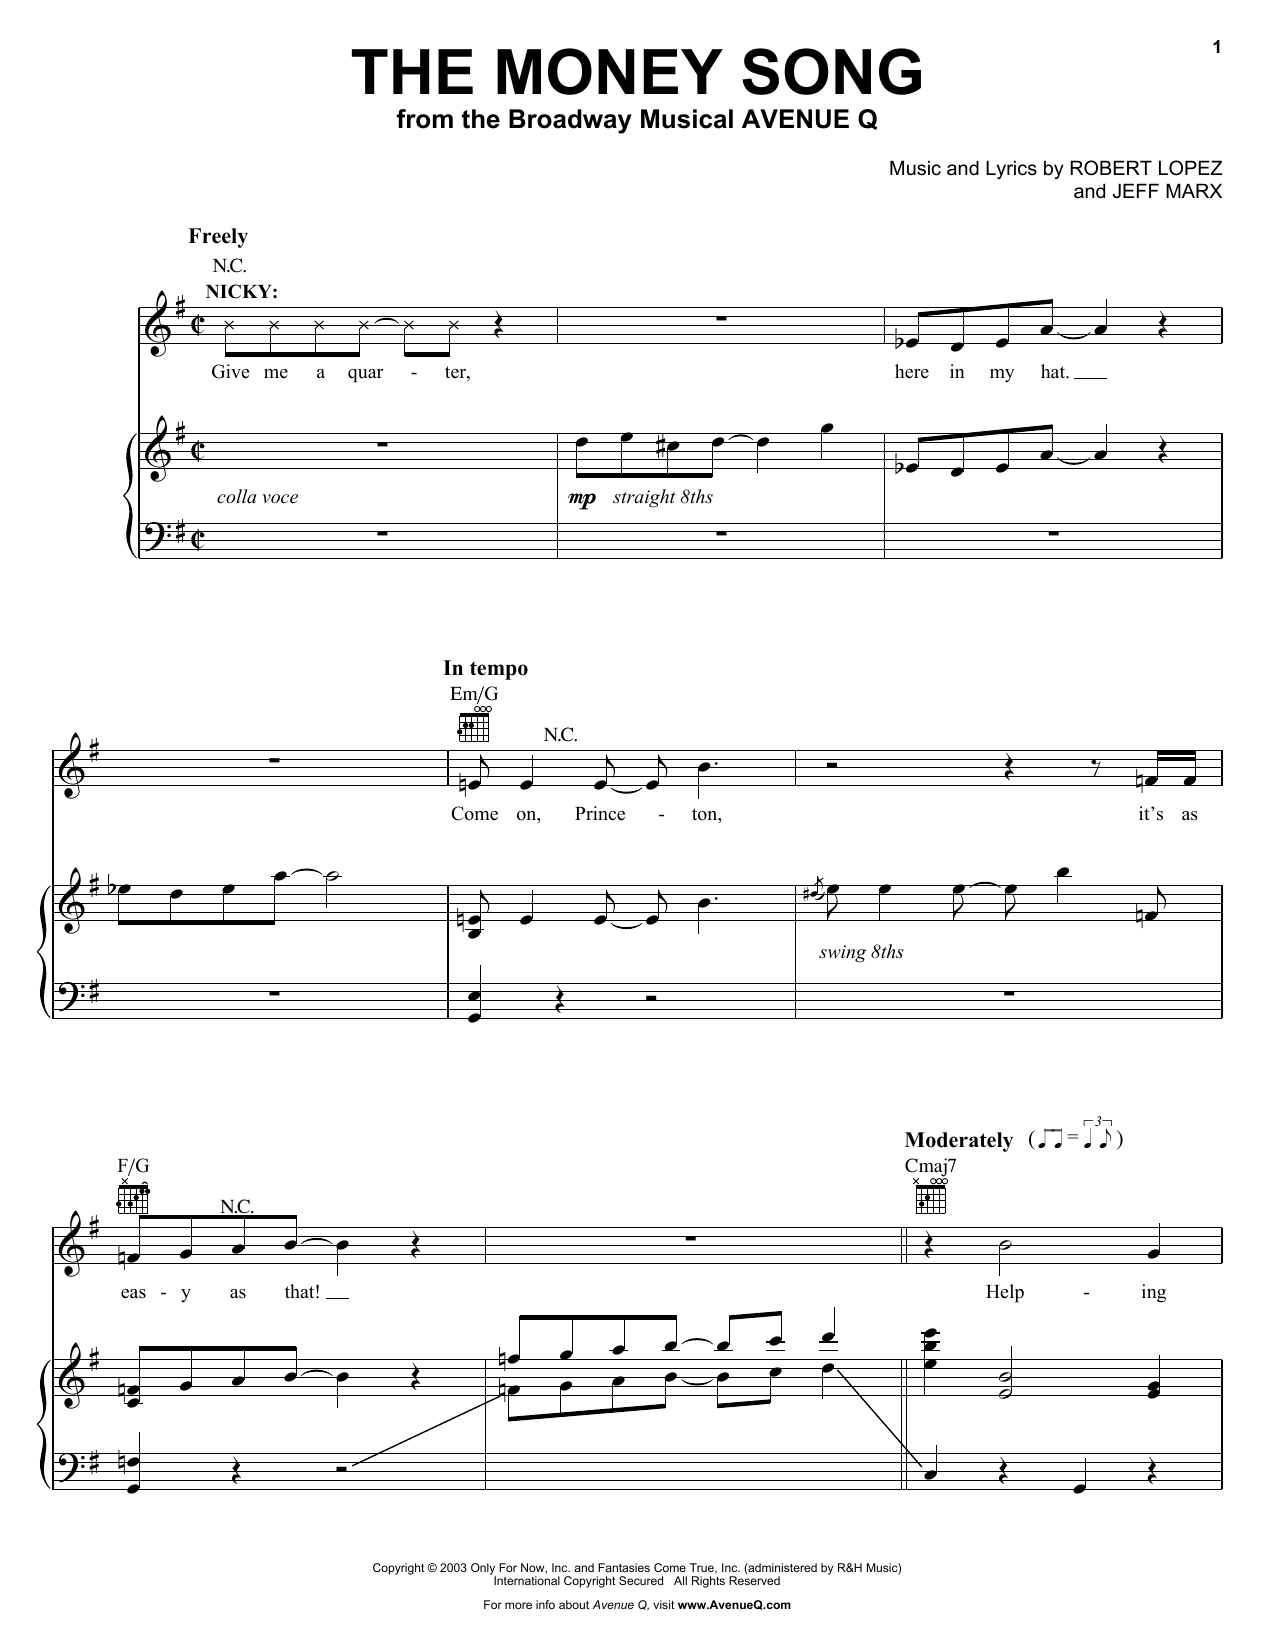 Robert Lopez & Jeff Marx The Money Song (from Avenue Q) sheet music notes and chords. Download Printable PDF.